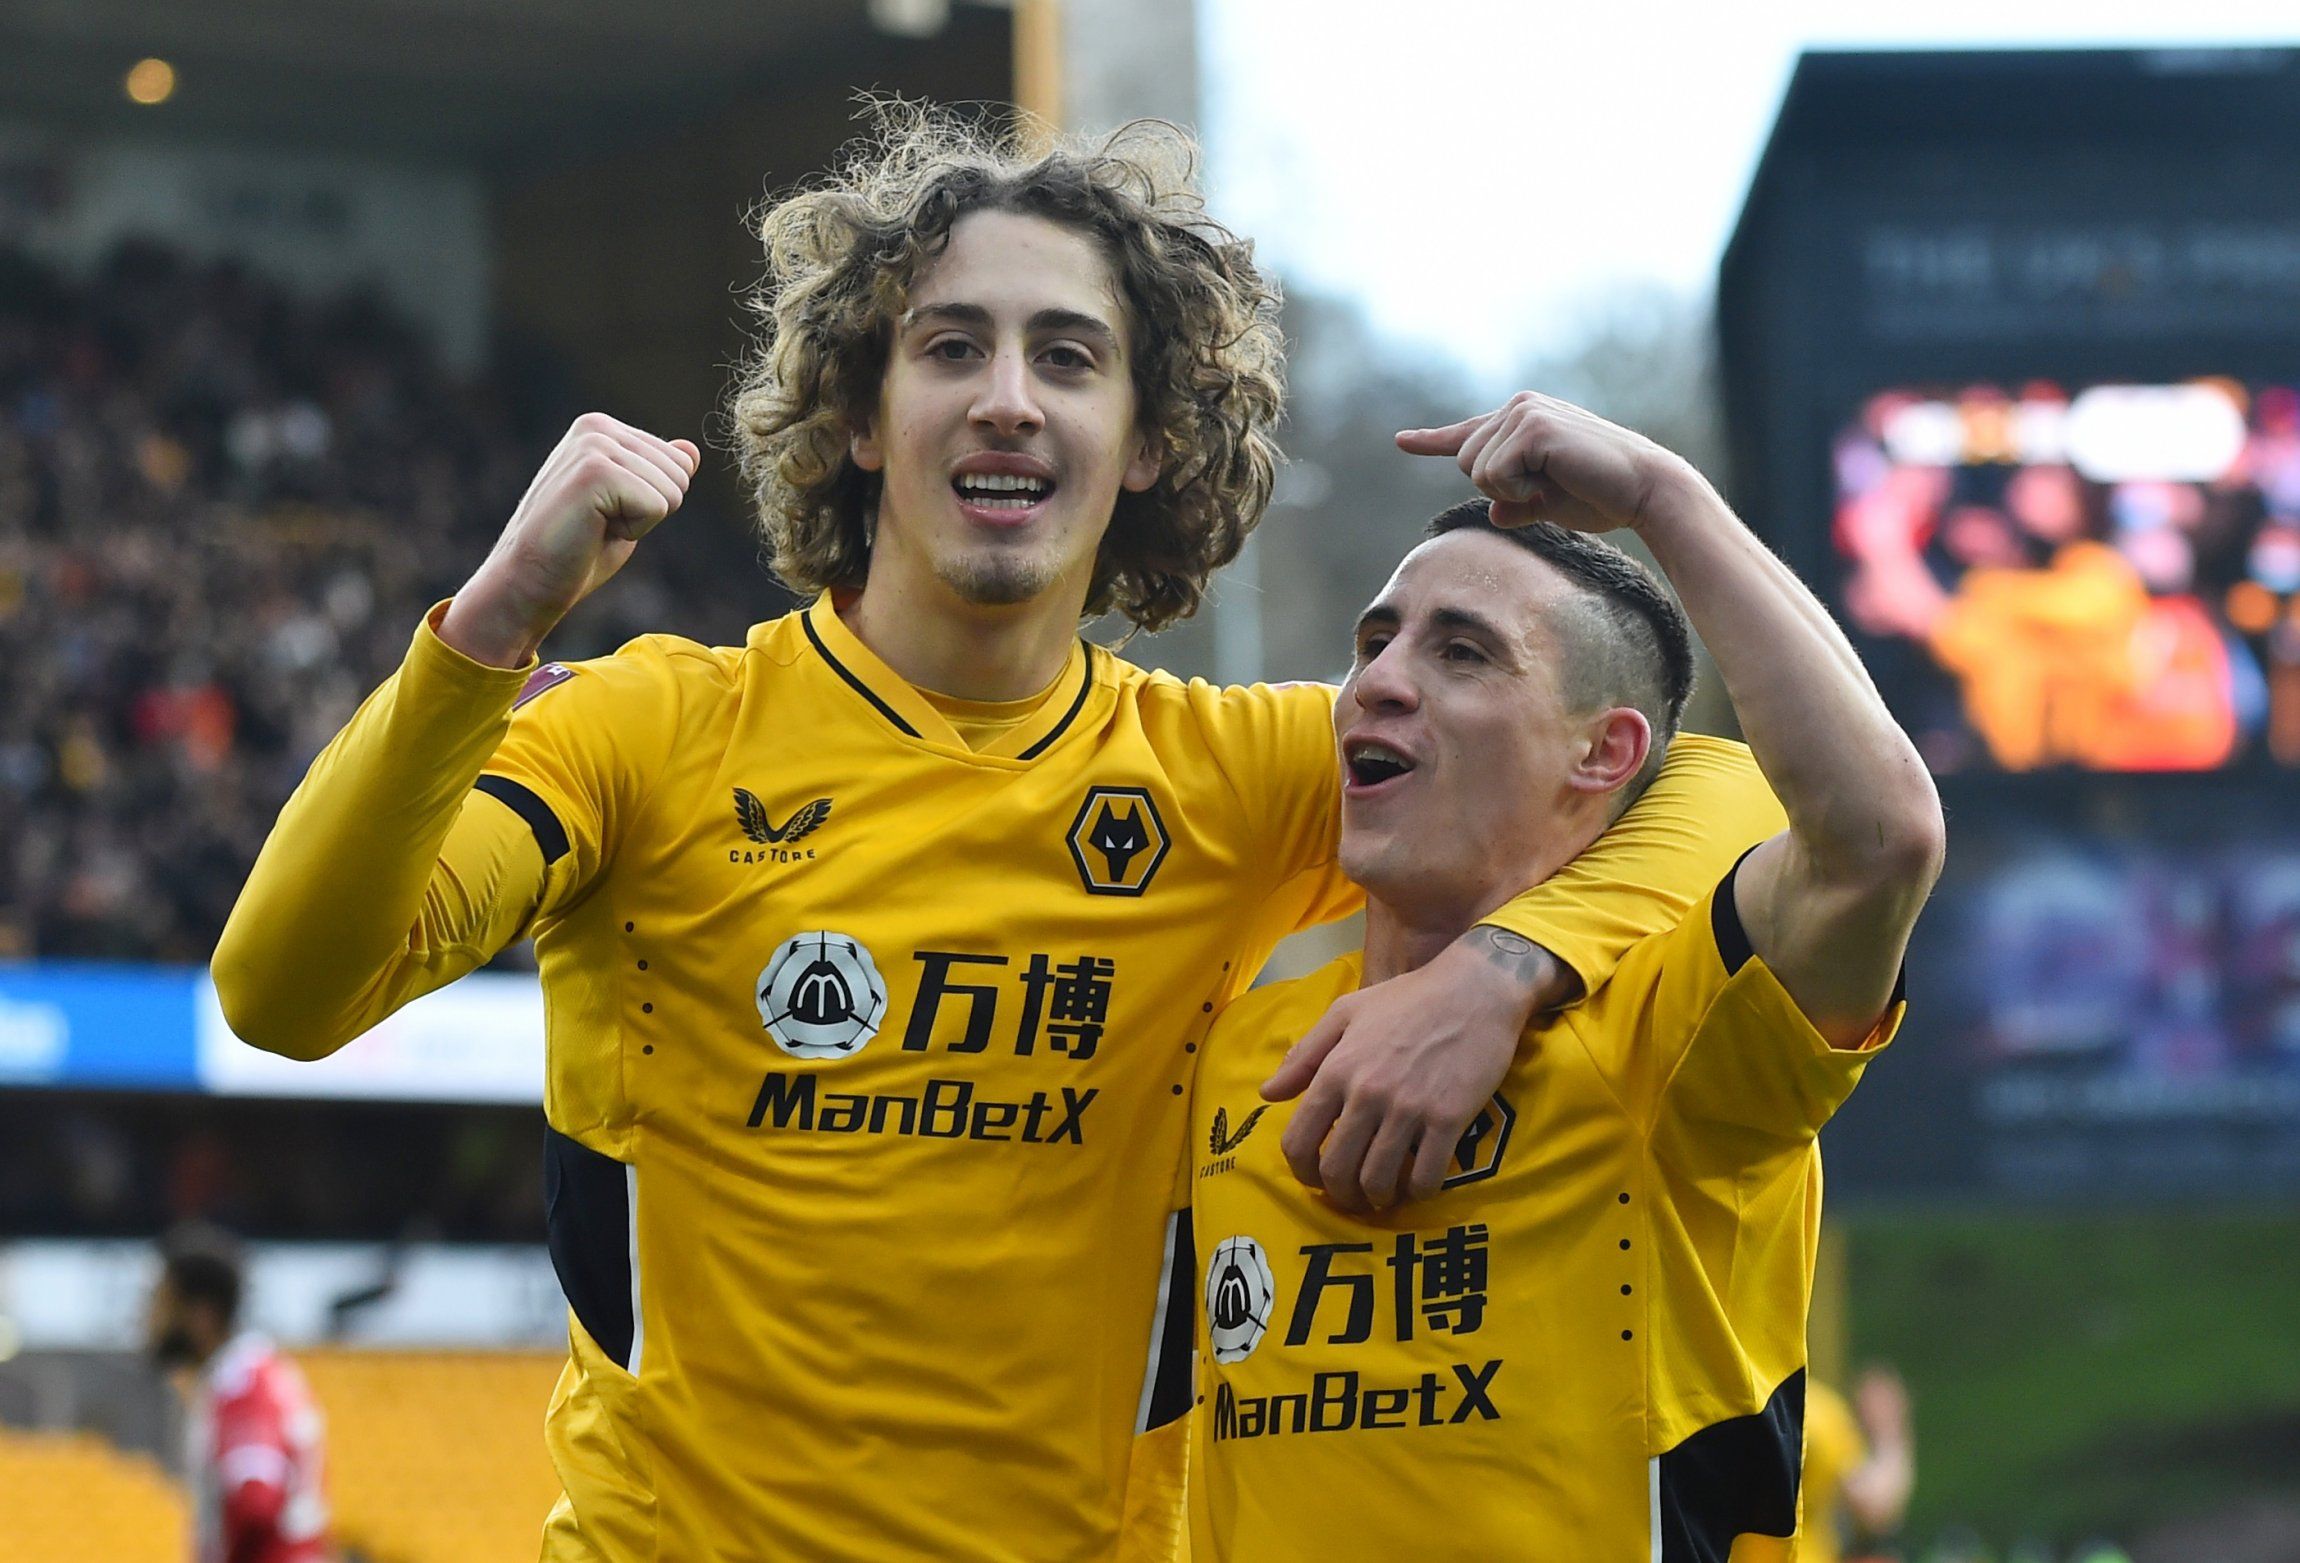 Bruno Lage, Fosun, Jeff Shi, Molineux, The Old Gold, Wolves, Wolves fans, Wolves info, Wolves latest, Wolves news, Wolves updates, WWFC, WWFC news, WWFC update, Premier League, Premier League news, Wolverhampton Wanderers, Fabio Silva, 
